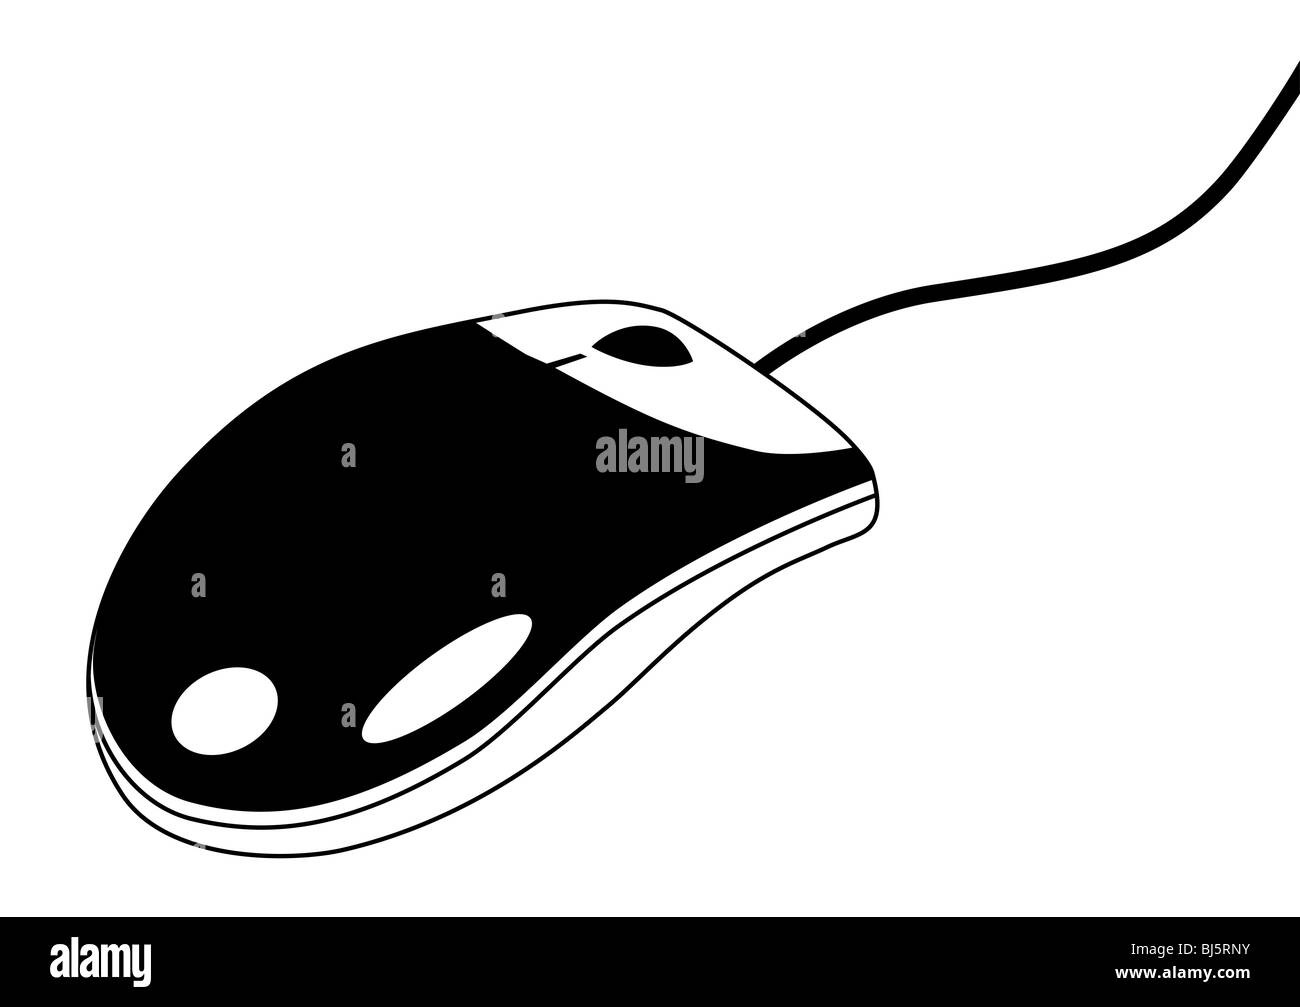 Black and white computer mouse with wheel and cable. Stock Photo